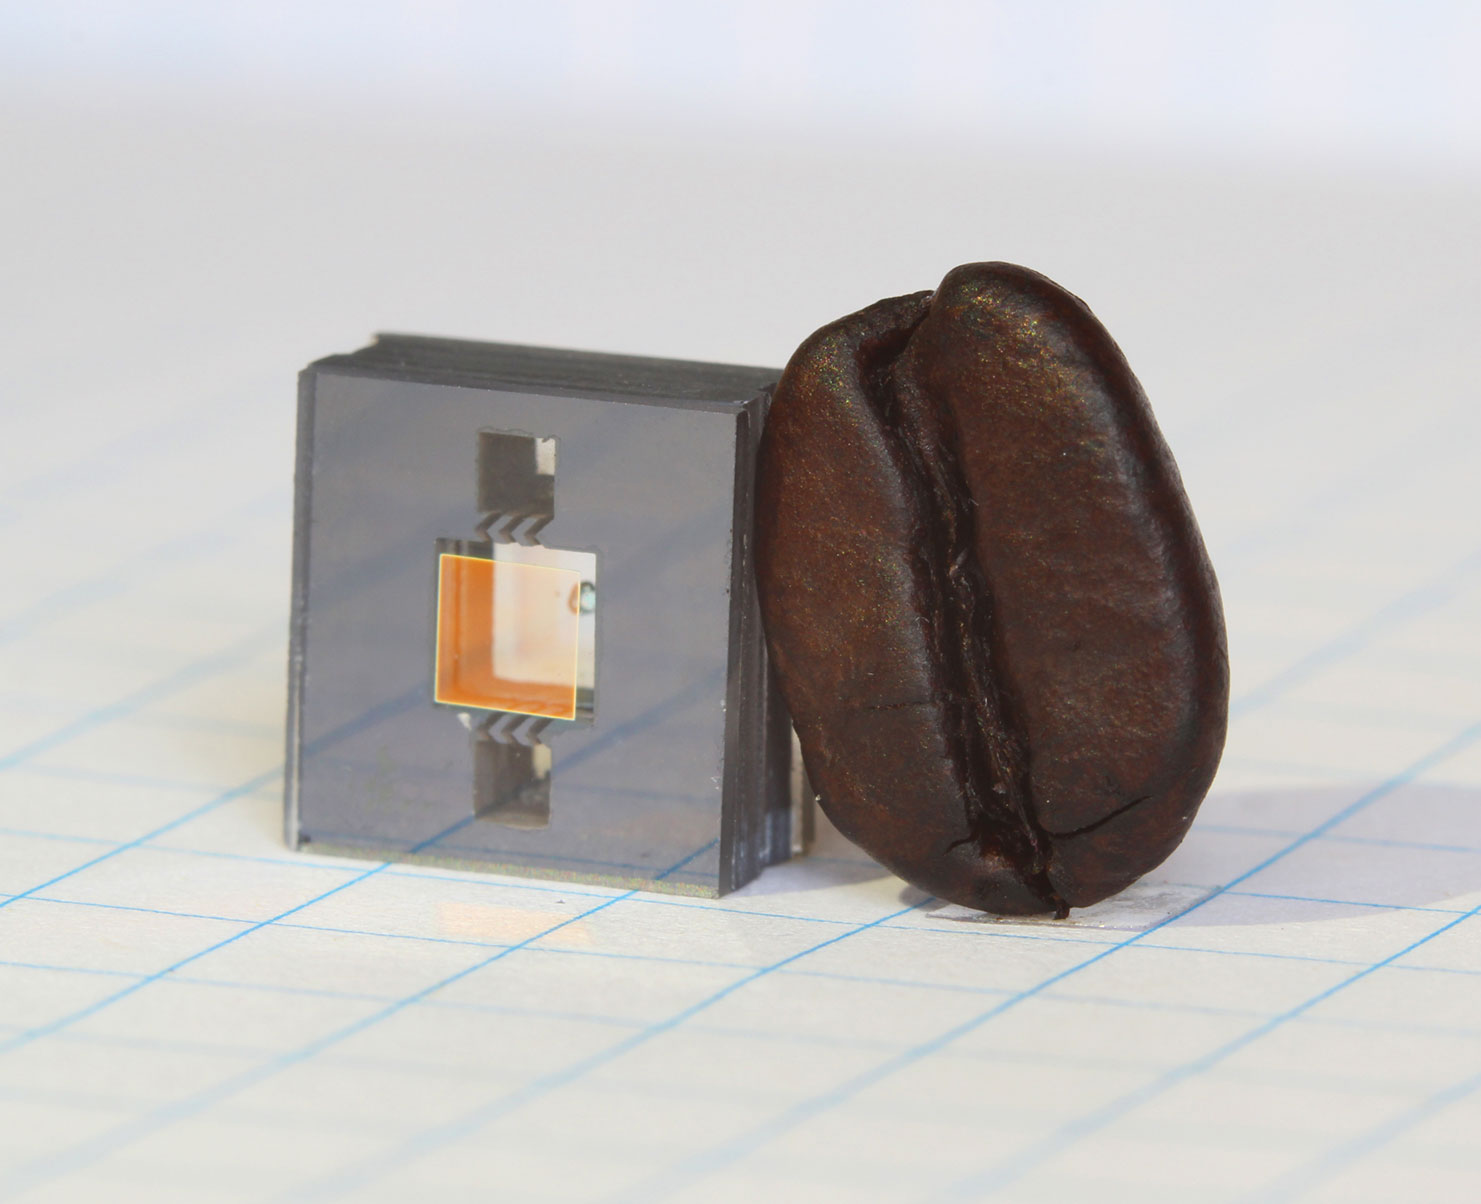 small atomic clock with coffee bean for scale